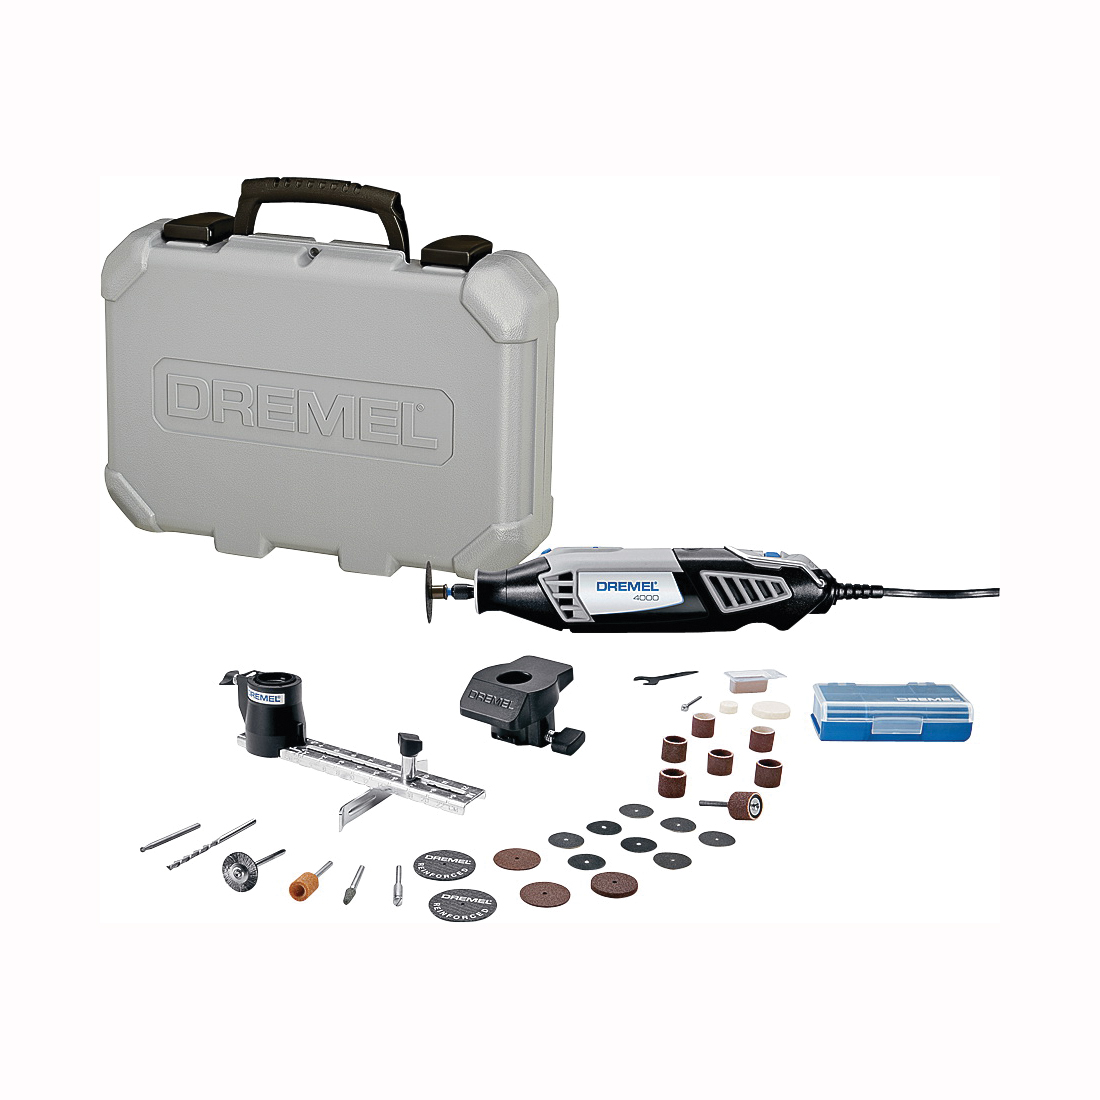 Dremel 4000-2/30 Rotary Tool Kit, 1.6 A, 1/32 to 1/8 in Chuck, Keyed Chuck, 5000 to 35,000 rpm Speed